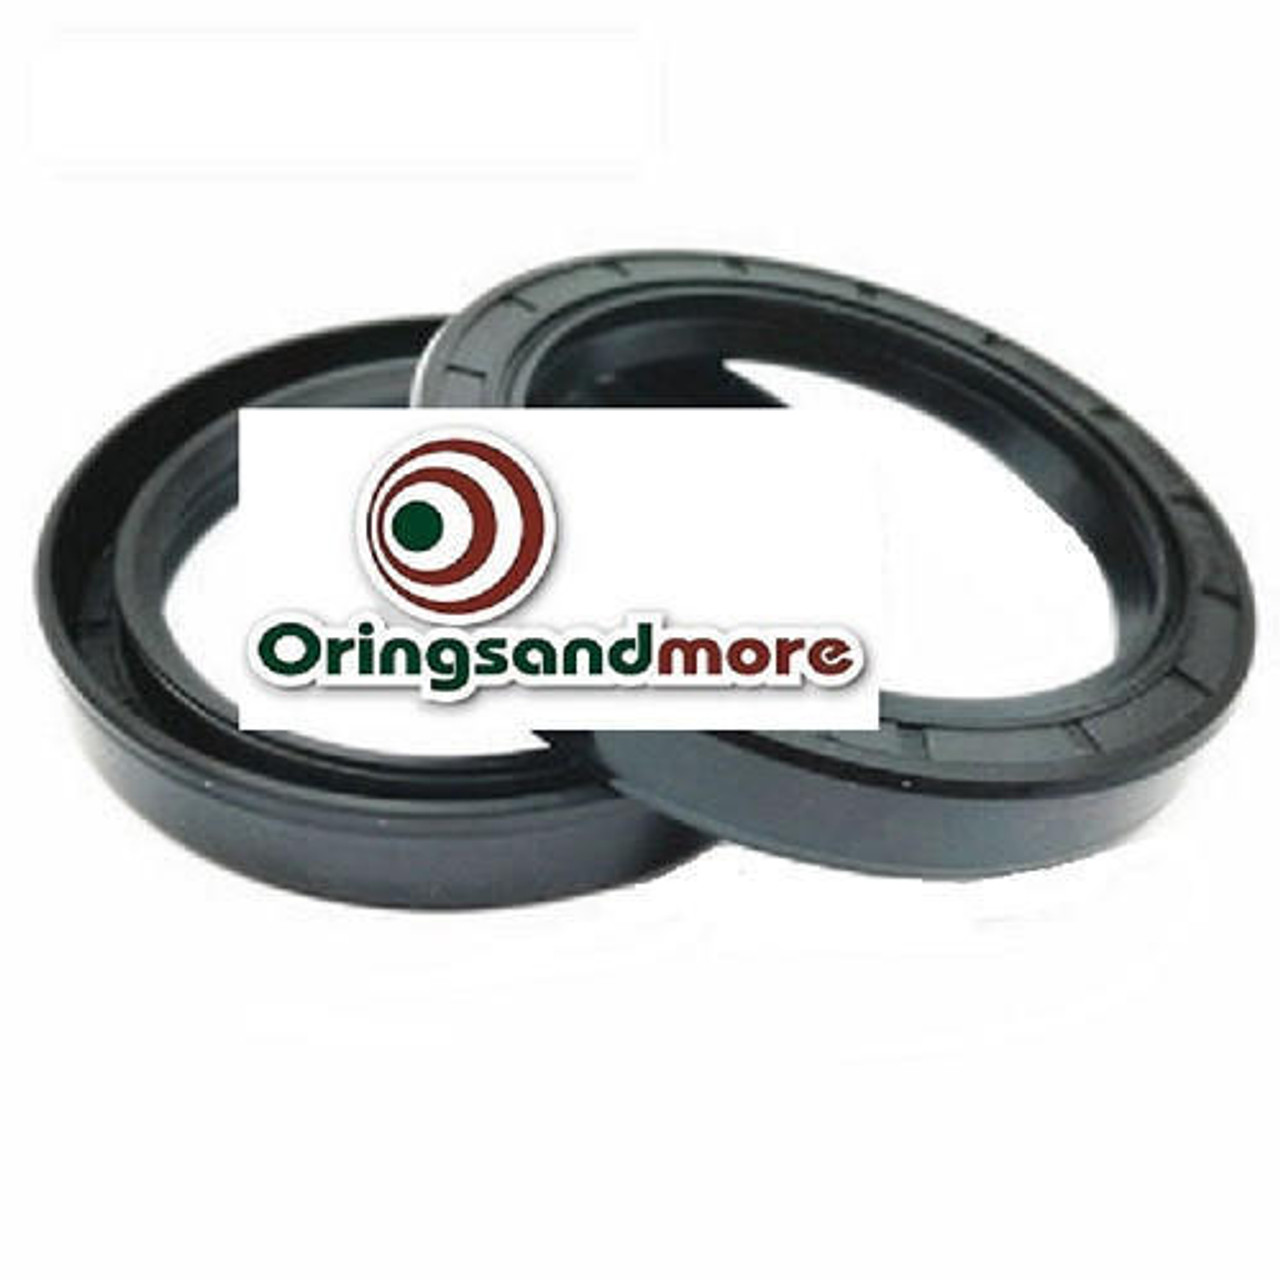 Metric Oil Shaft Seal 26 x 36 x 10mm Double Lip Price for 1 pc